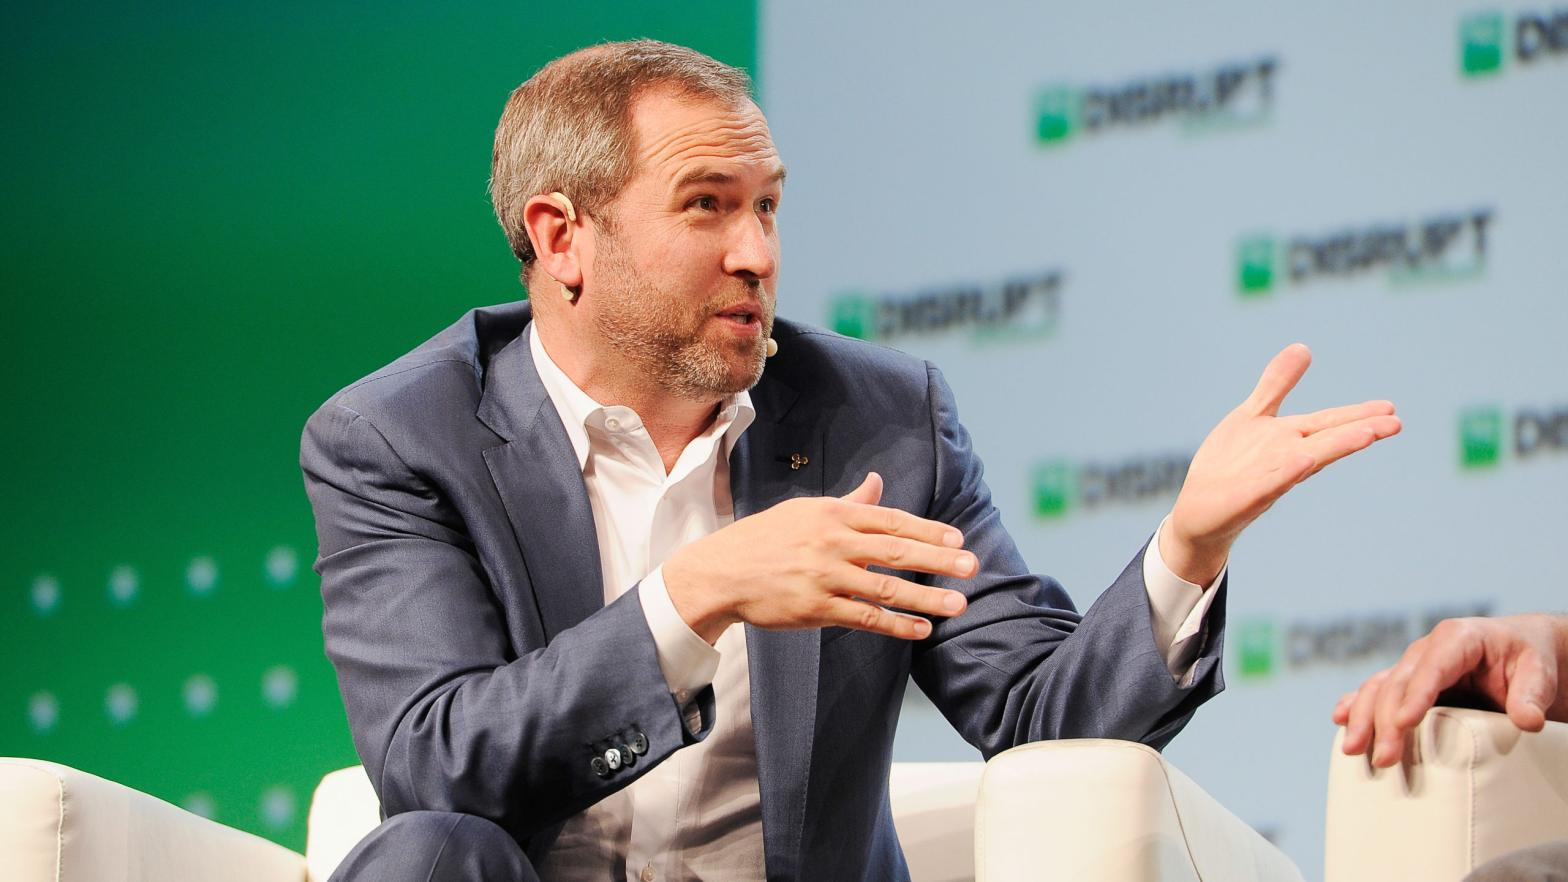 File photo of Ripple CEO Brad Garlinghouse at TechCrunch Disrupt SF 2018 on September 5, 2018 in San Francisco, California. (Photo: Steve Jennings, Getty Images)